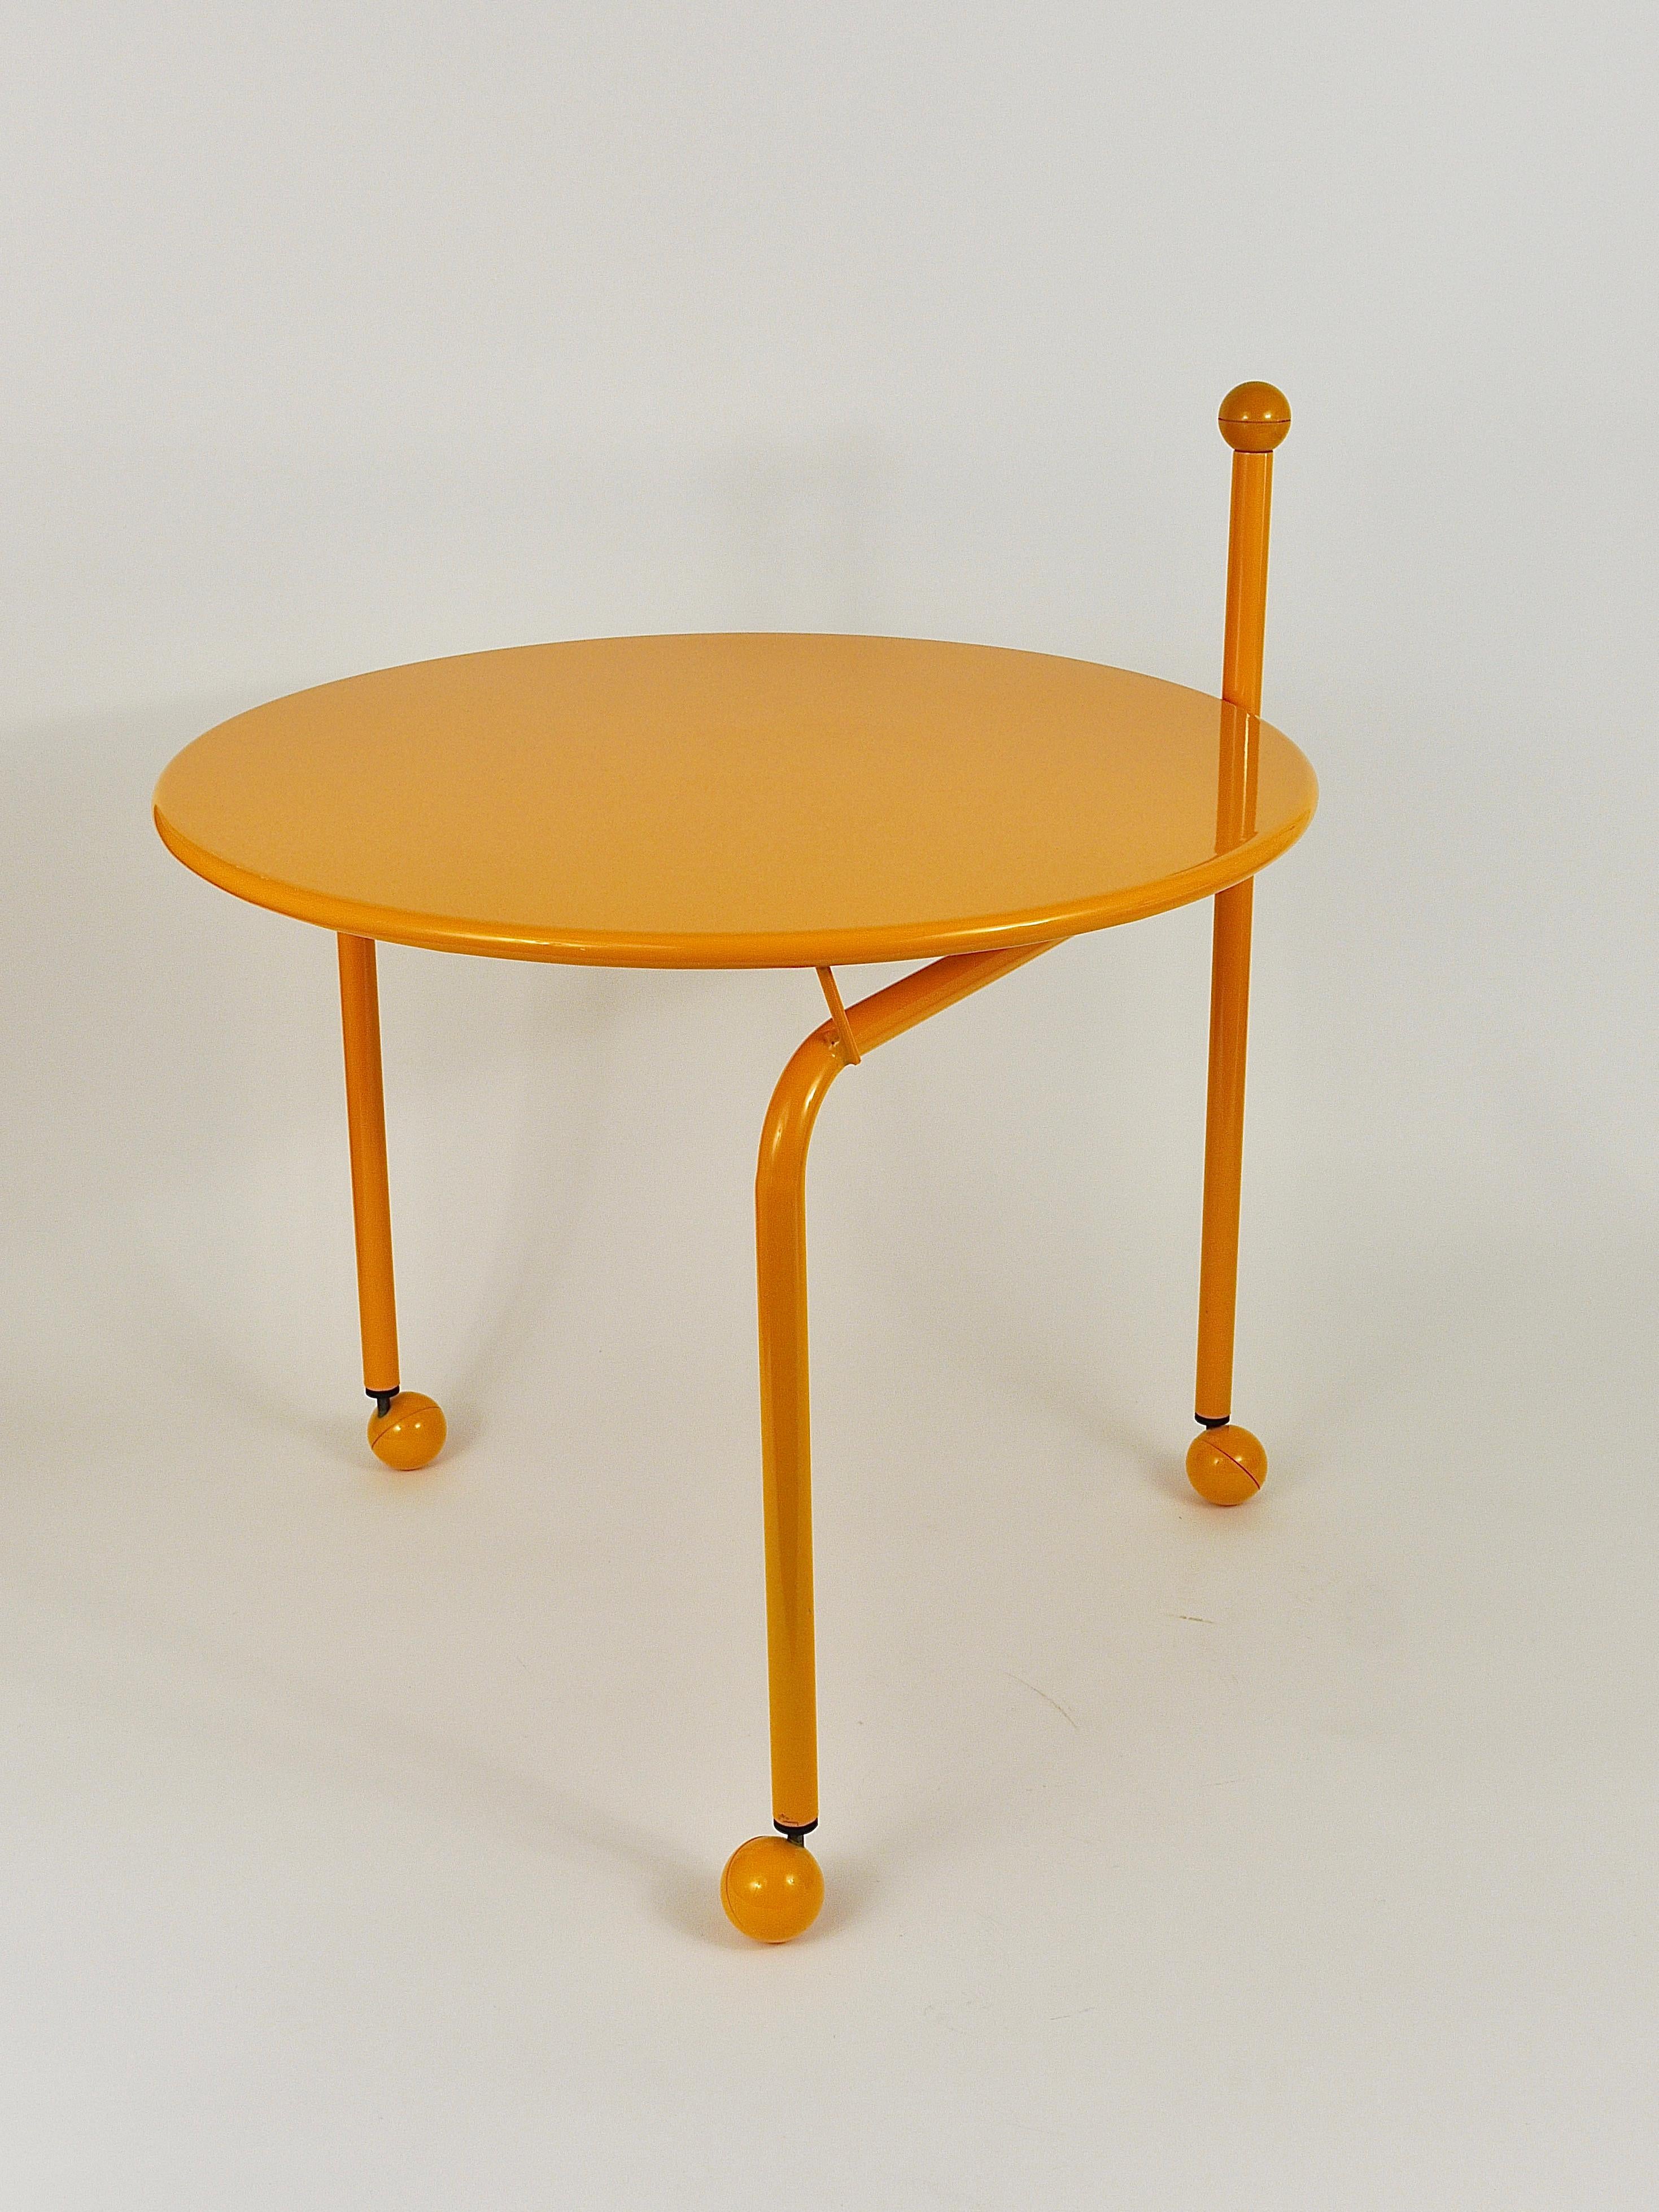 Swedish Tord Bjorklund Post-modern Side or Coffee Table, Memphis Style, Sweden, 1980s For Sale